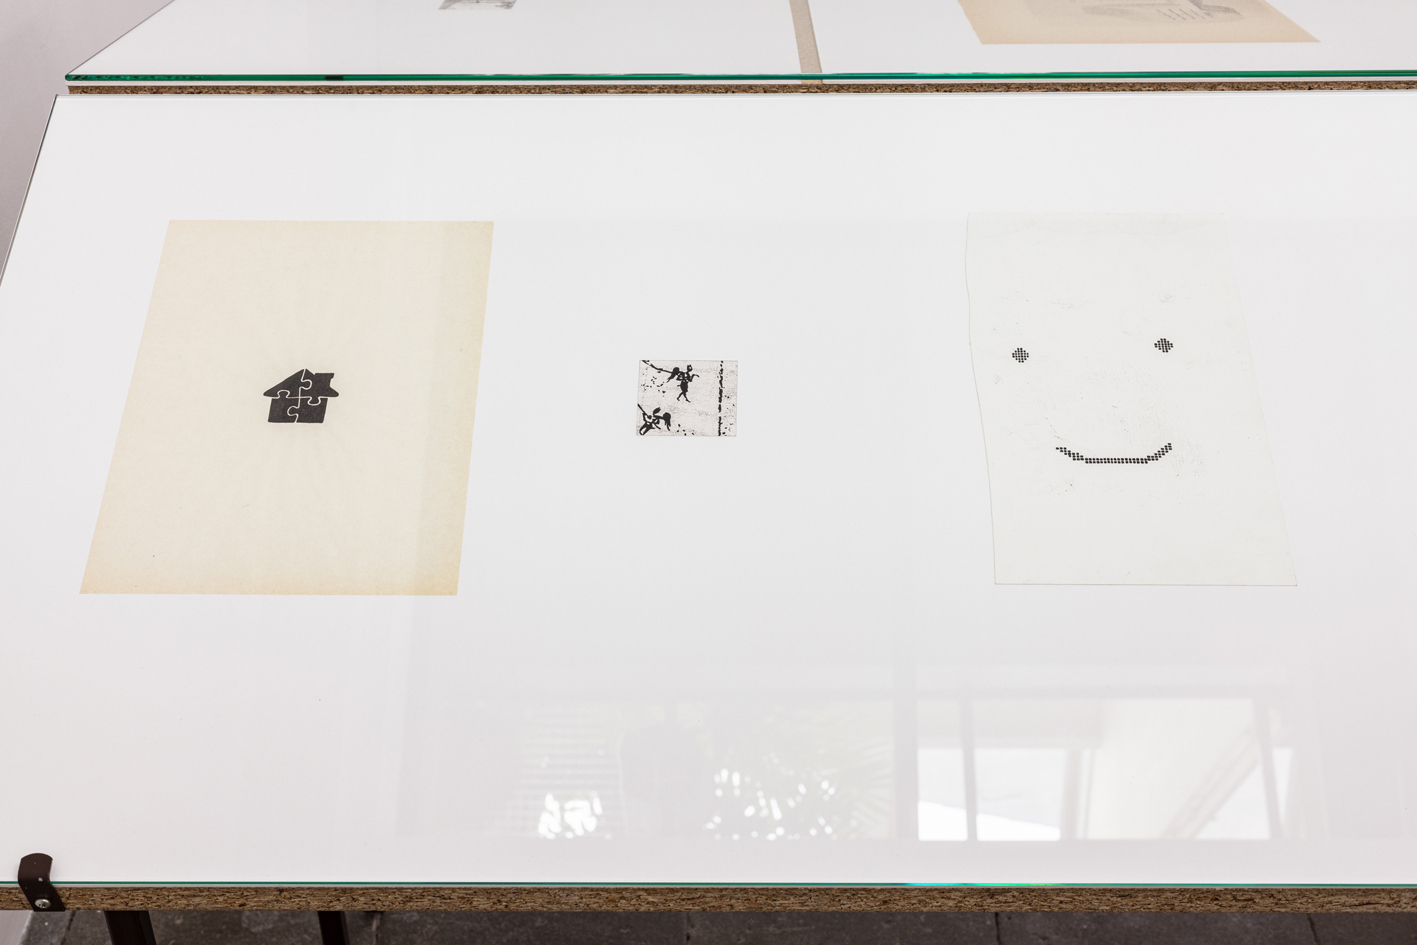 Maxime Le Bon, On the left: Puzzle, 2020, ink on paper, 21 x 29,7 cm In the middle: Demons, 2022, oil and graphit on paper, 6 x 6 cm On the right: :) , 2021, oil on paper, 17 x 30 cm